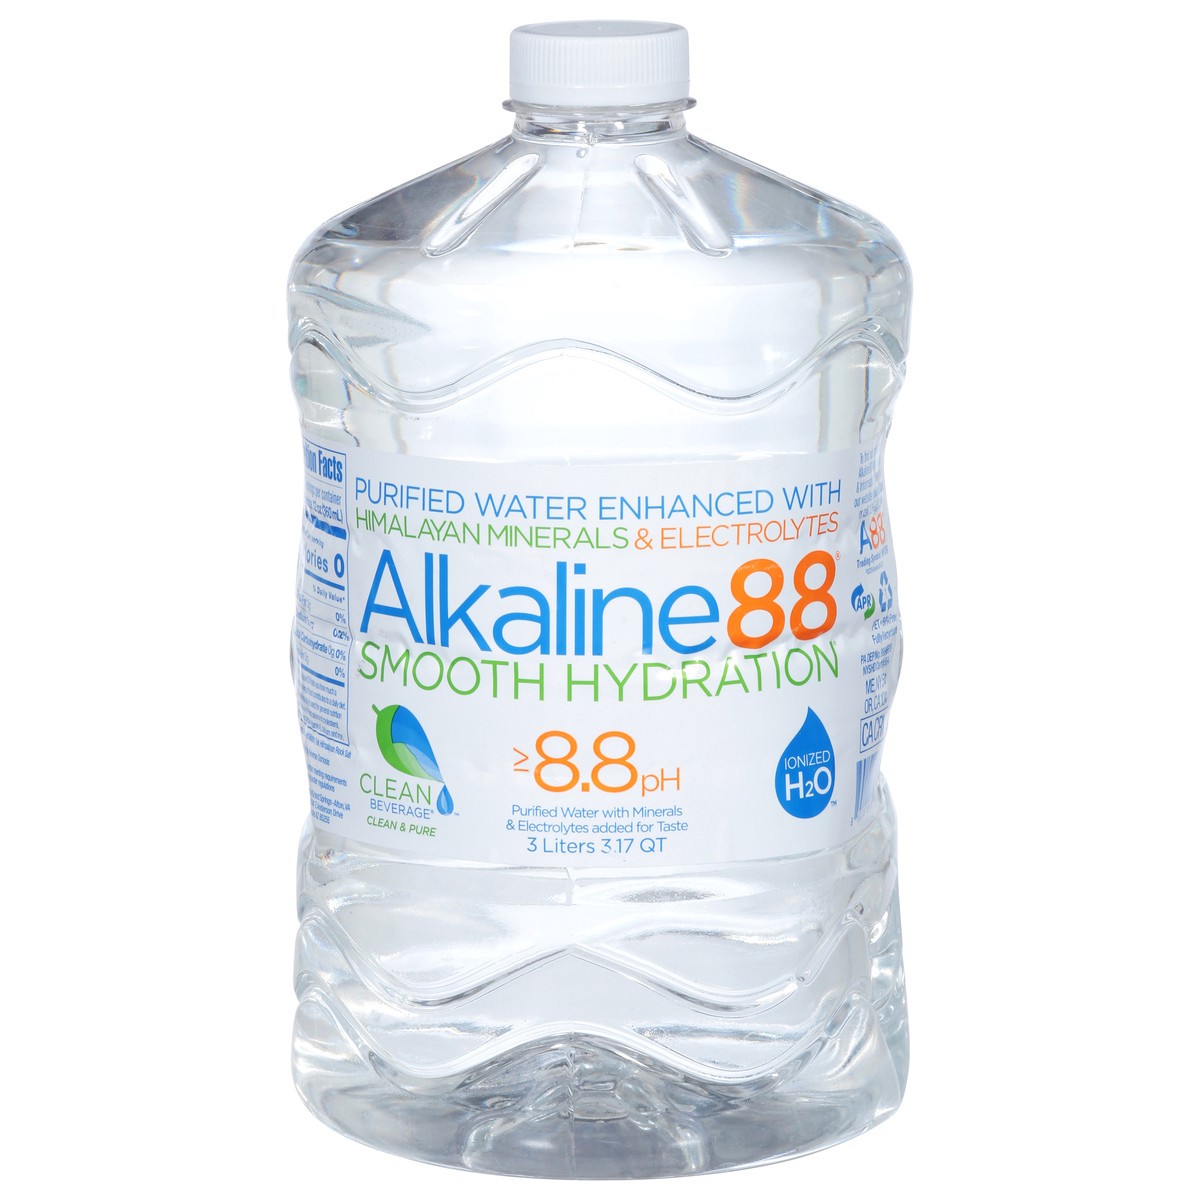 slide 1 of 9, Alkaline88 Smooth Hydration Himalayan Minerals Purified Water 3.17 qt, 3 liter